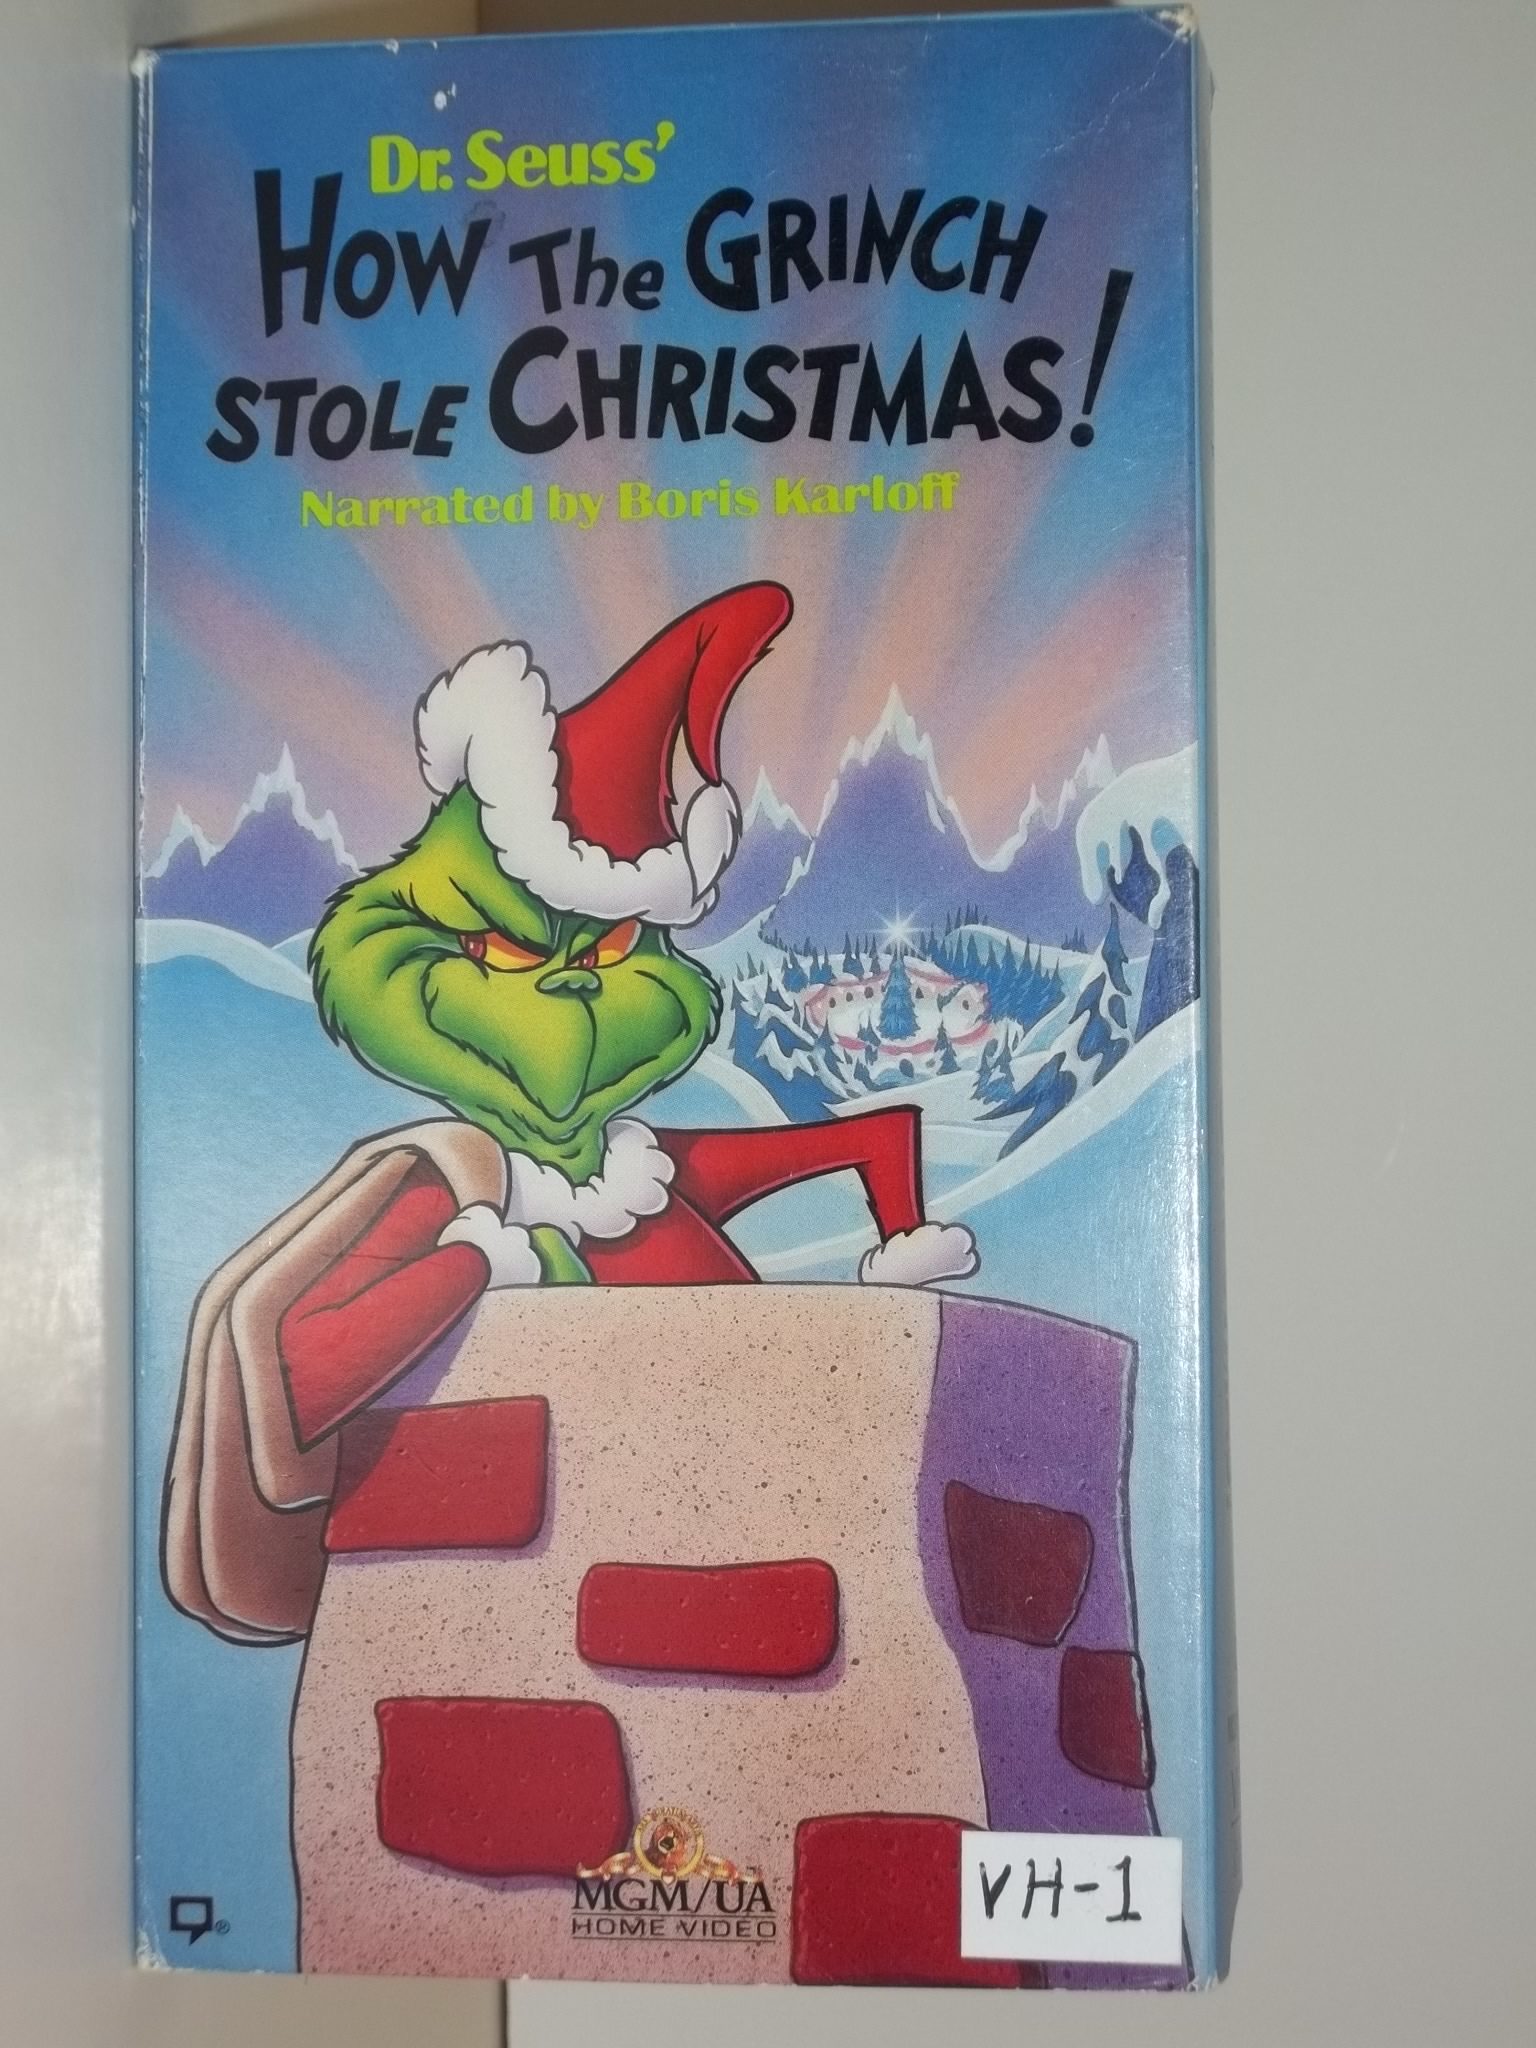 The Grinch Vhs Uk